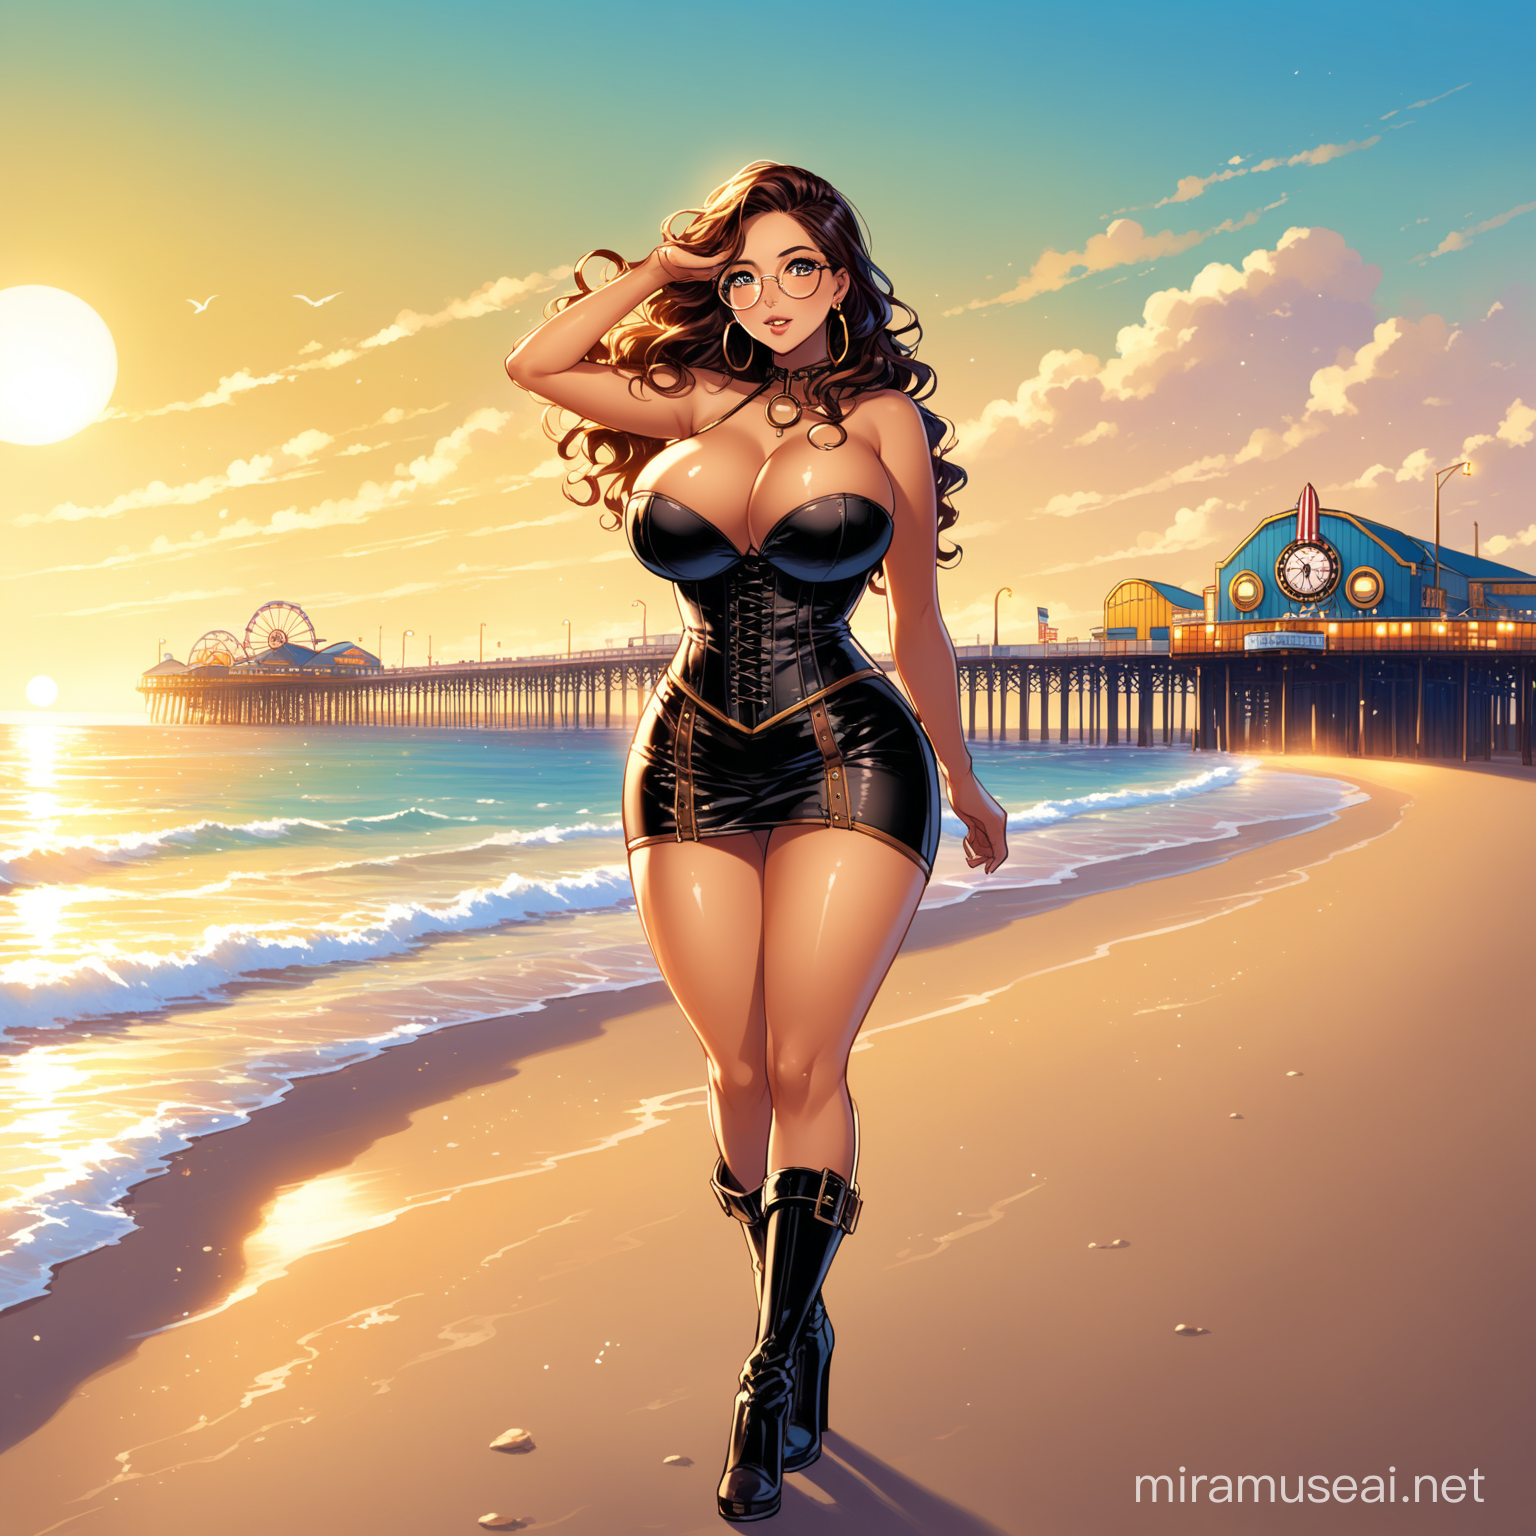 Mysterious Transformation Seductive Woman in Latex Corset Strolling by Santa Monica Pier